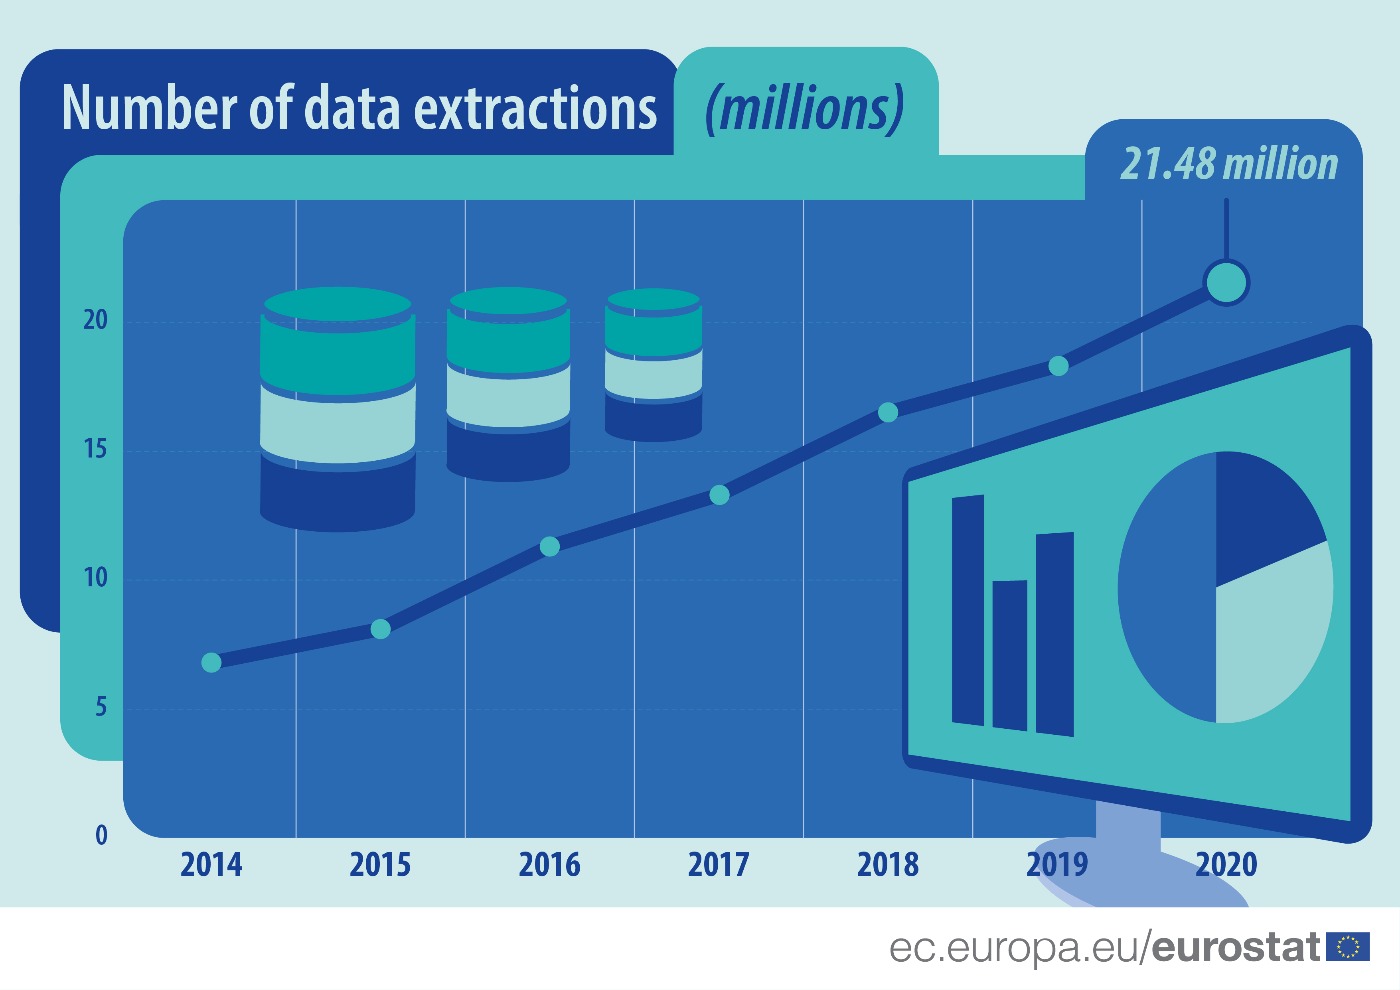 Line graph: Number of data extractions on the Eurostat website in millions, from 2014 till 2020 